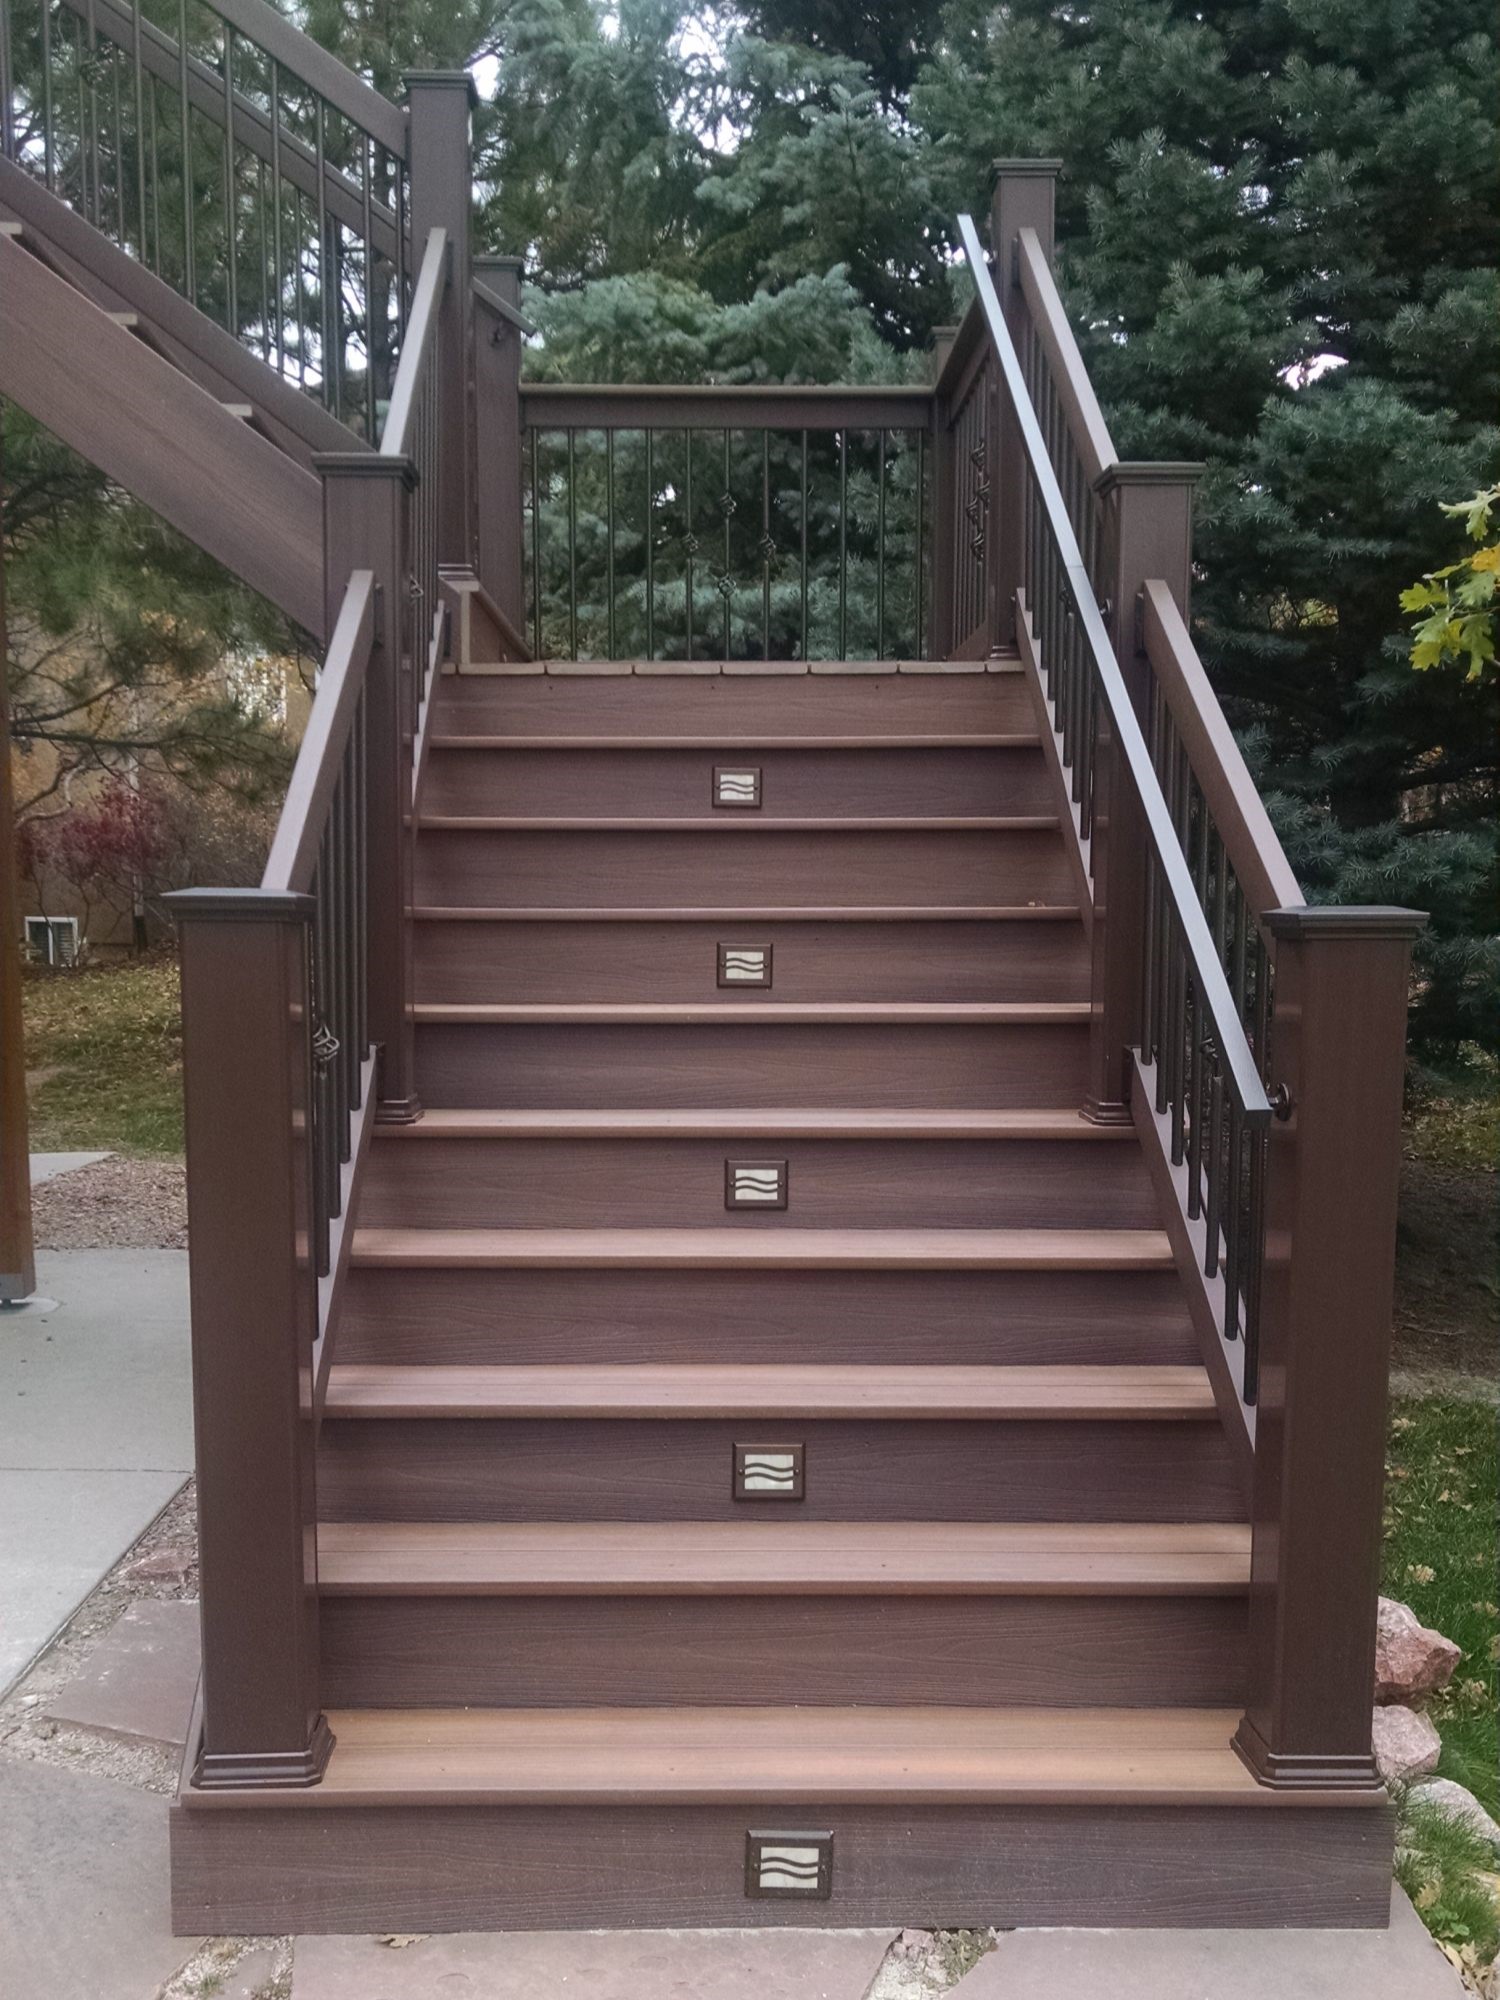 4' wide closed deck stairs with lights on the risers.